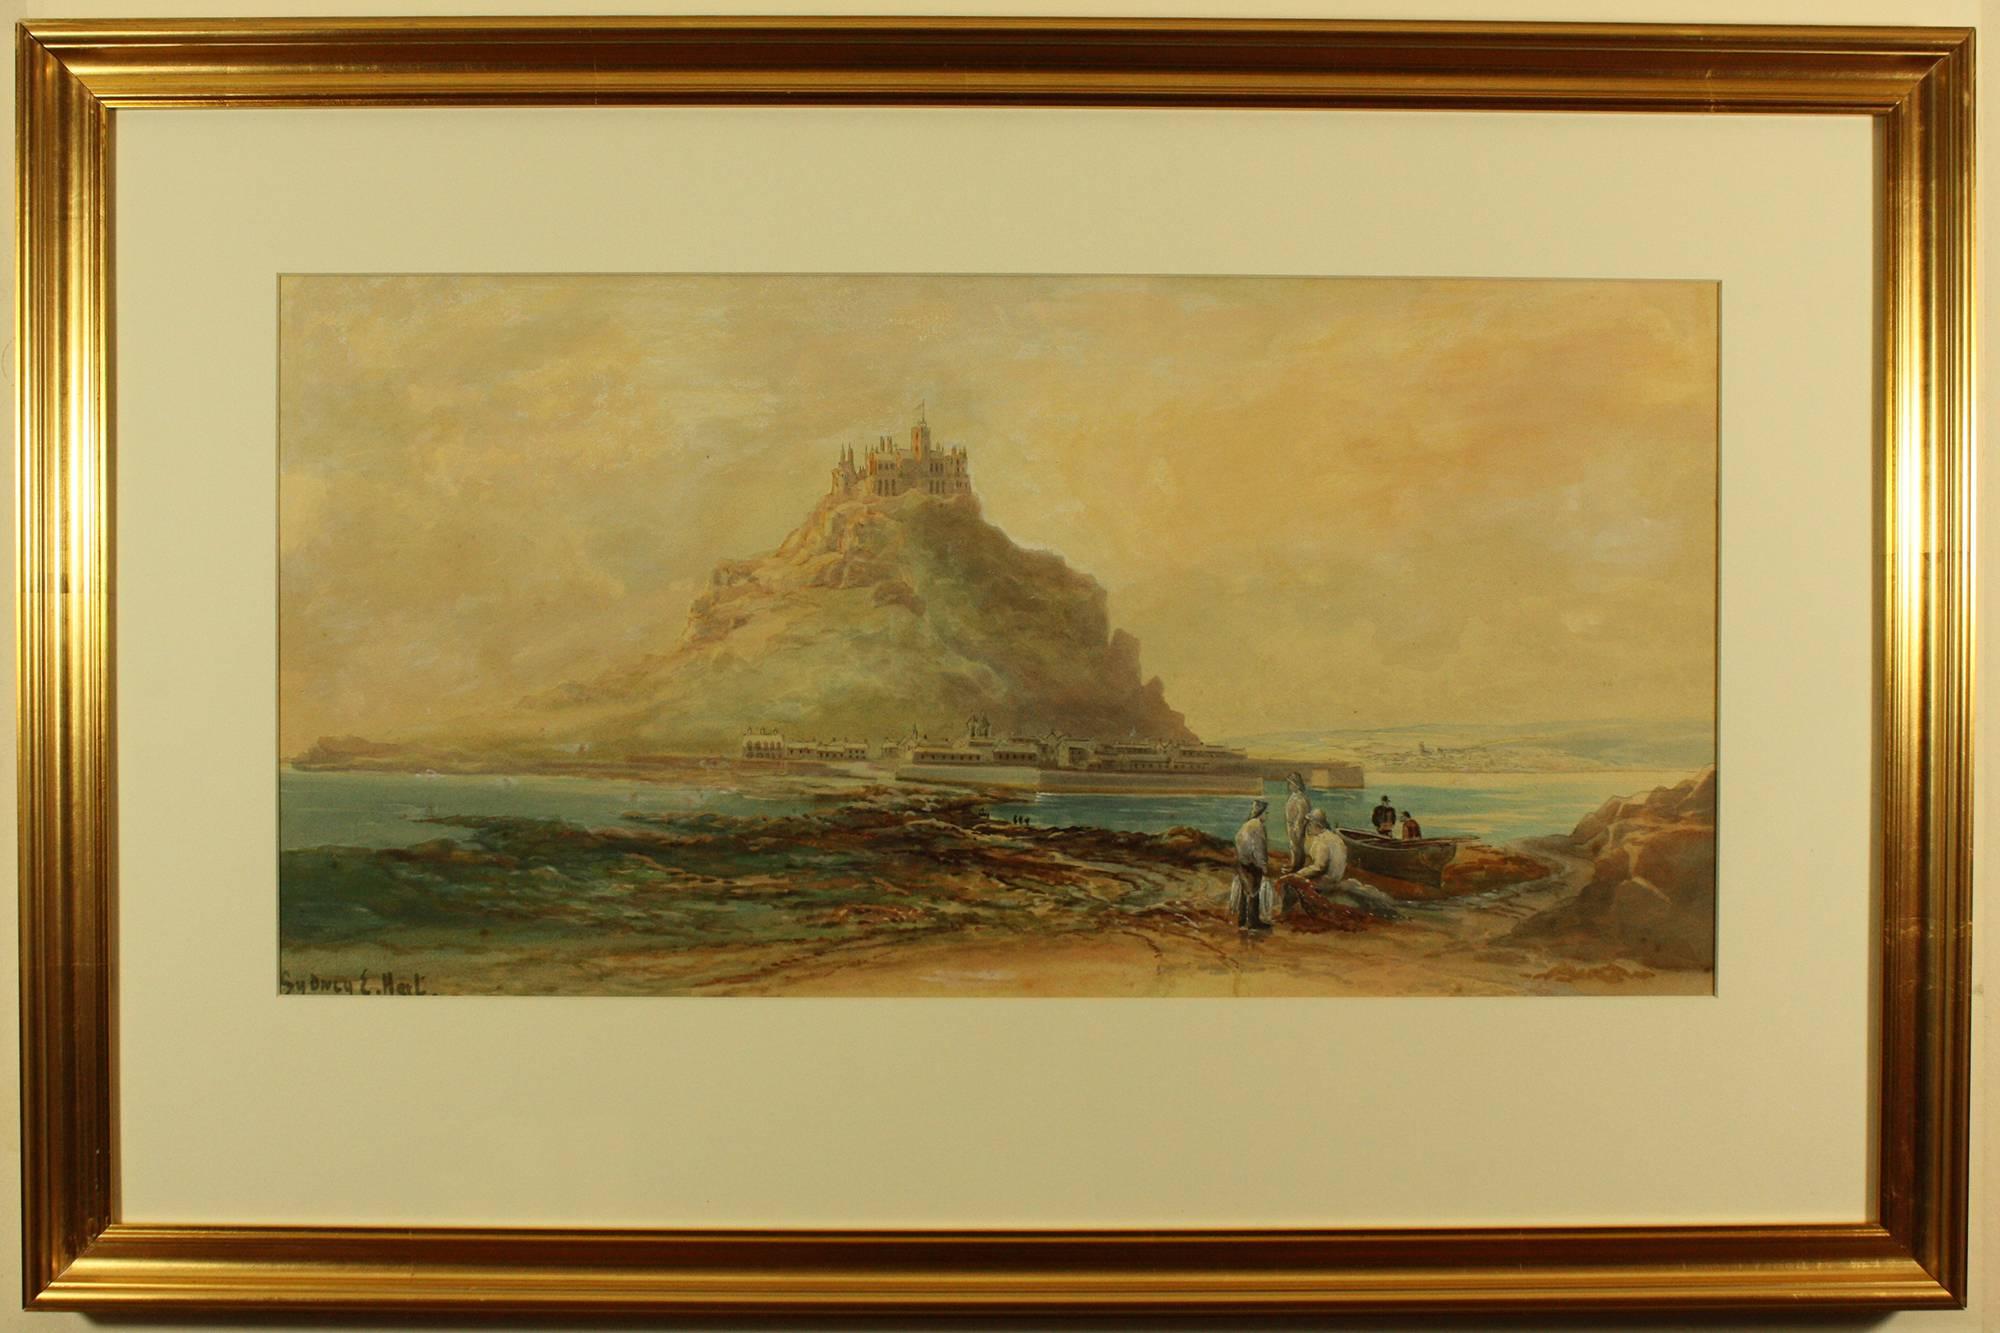 St Michael's Mount by Sydney Ernest Hart
View of the Mount from the Marazion end of the causeway, fishermen with there catch in the foreground
Image Size 23 ins by 15.5 ins
Frame Overall  31.5 ins by 20.75 ins
New Frame and Mount

Sydney Ernest